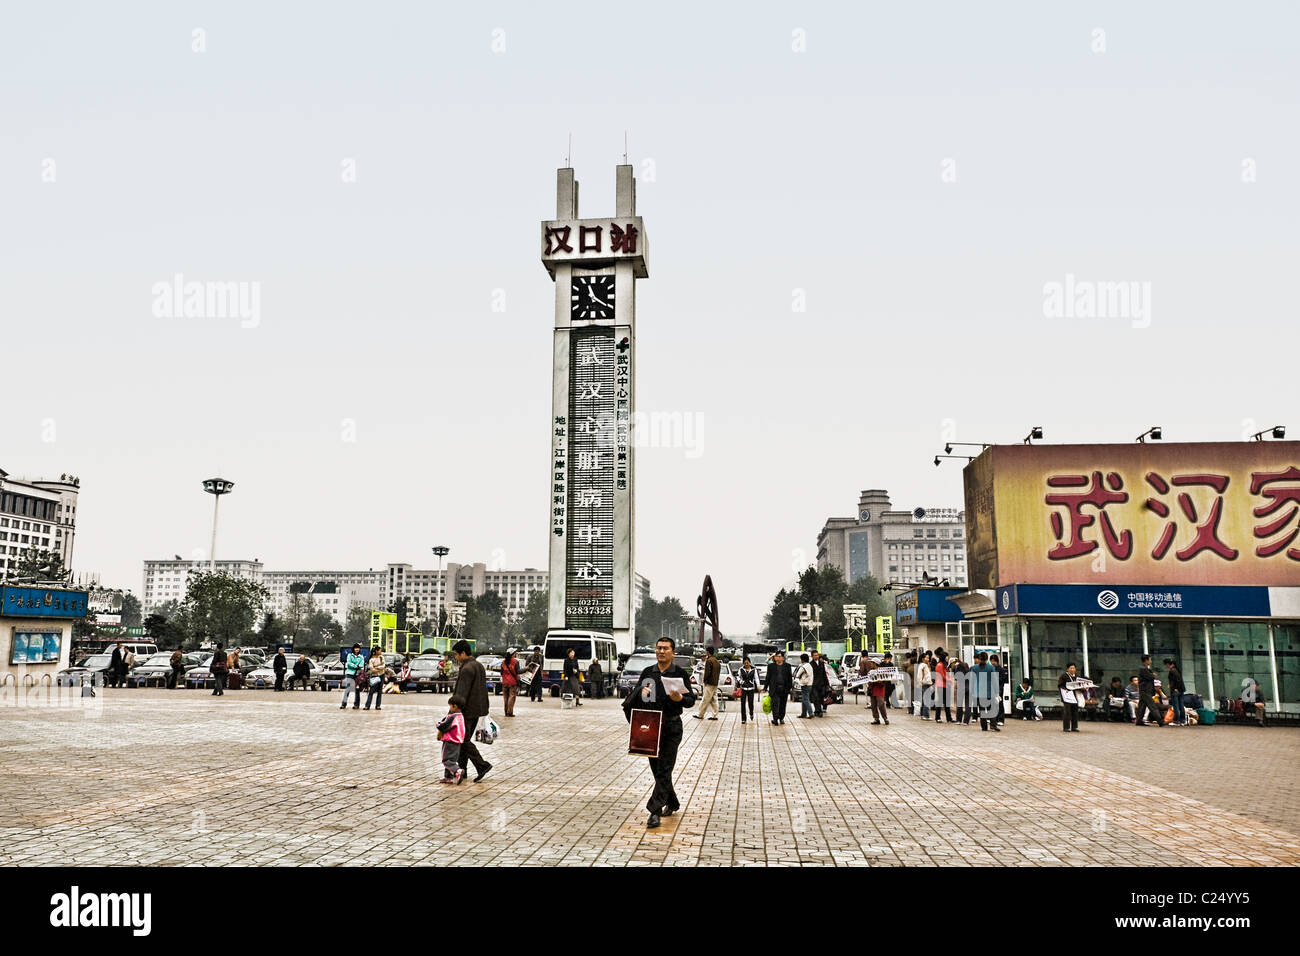 CHINA, WUHAN: Hankou Railway Station in Wuhan with plaza and people traveling to the train front of the station. Stock Photo